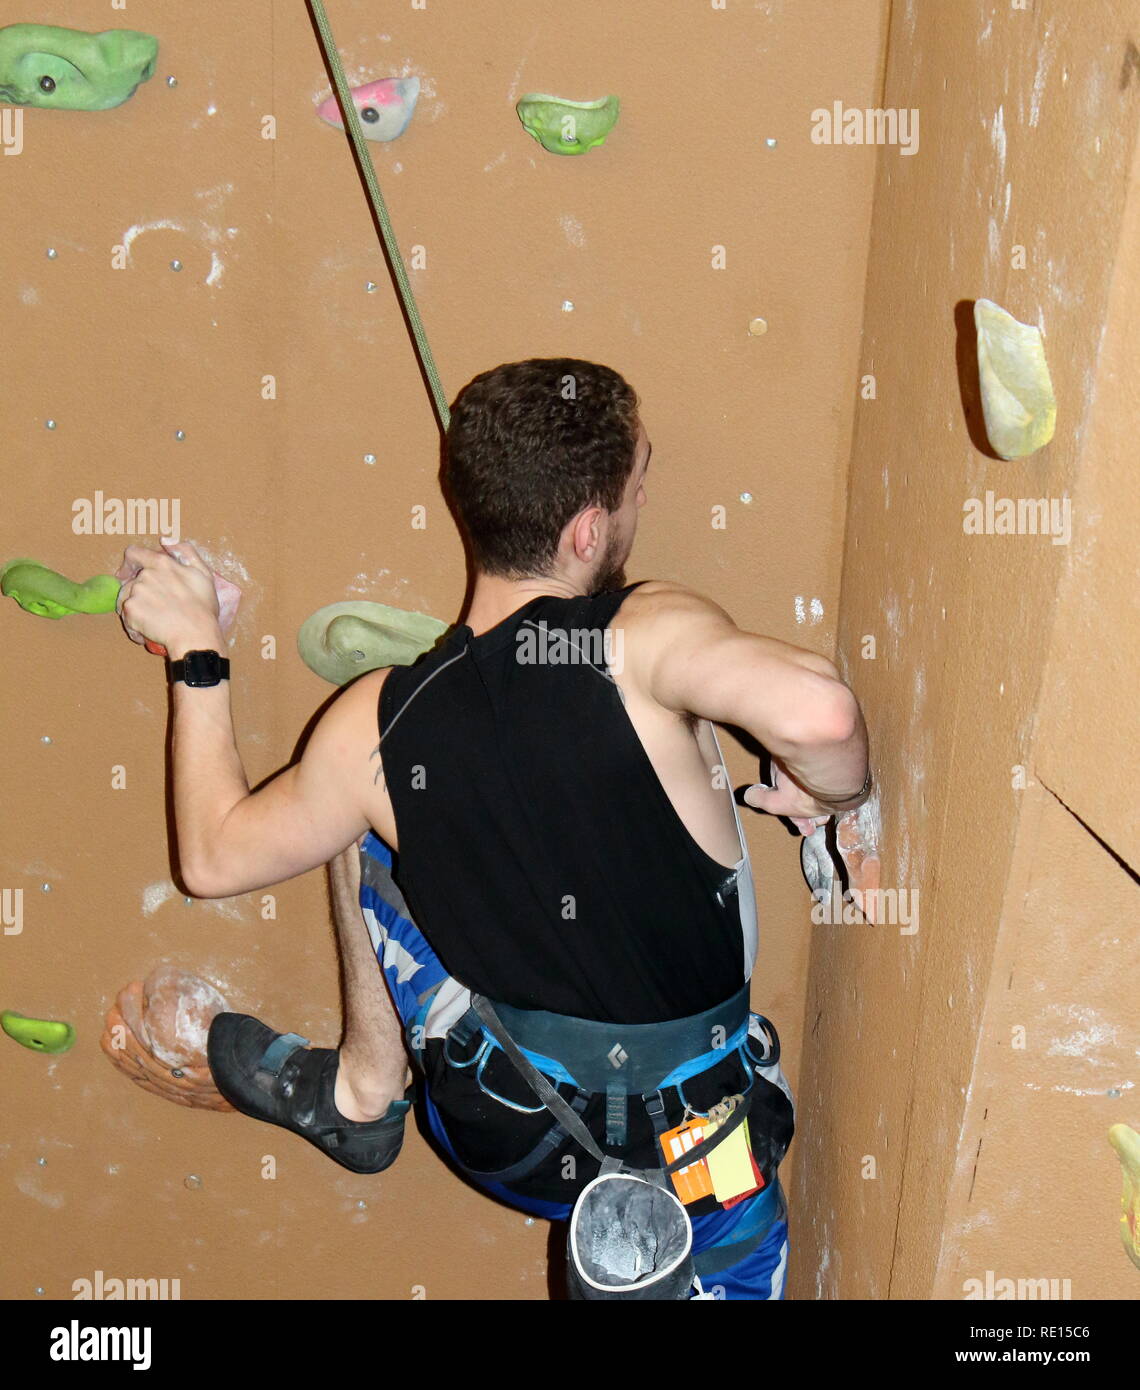 Climber pushing against a hold while ascending brown wall Stock Photo